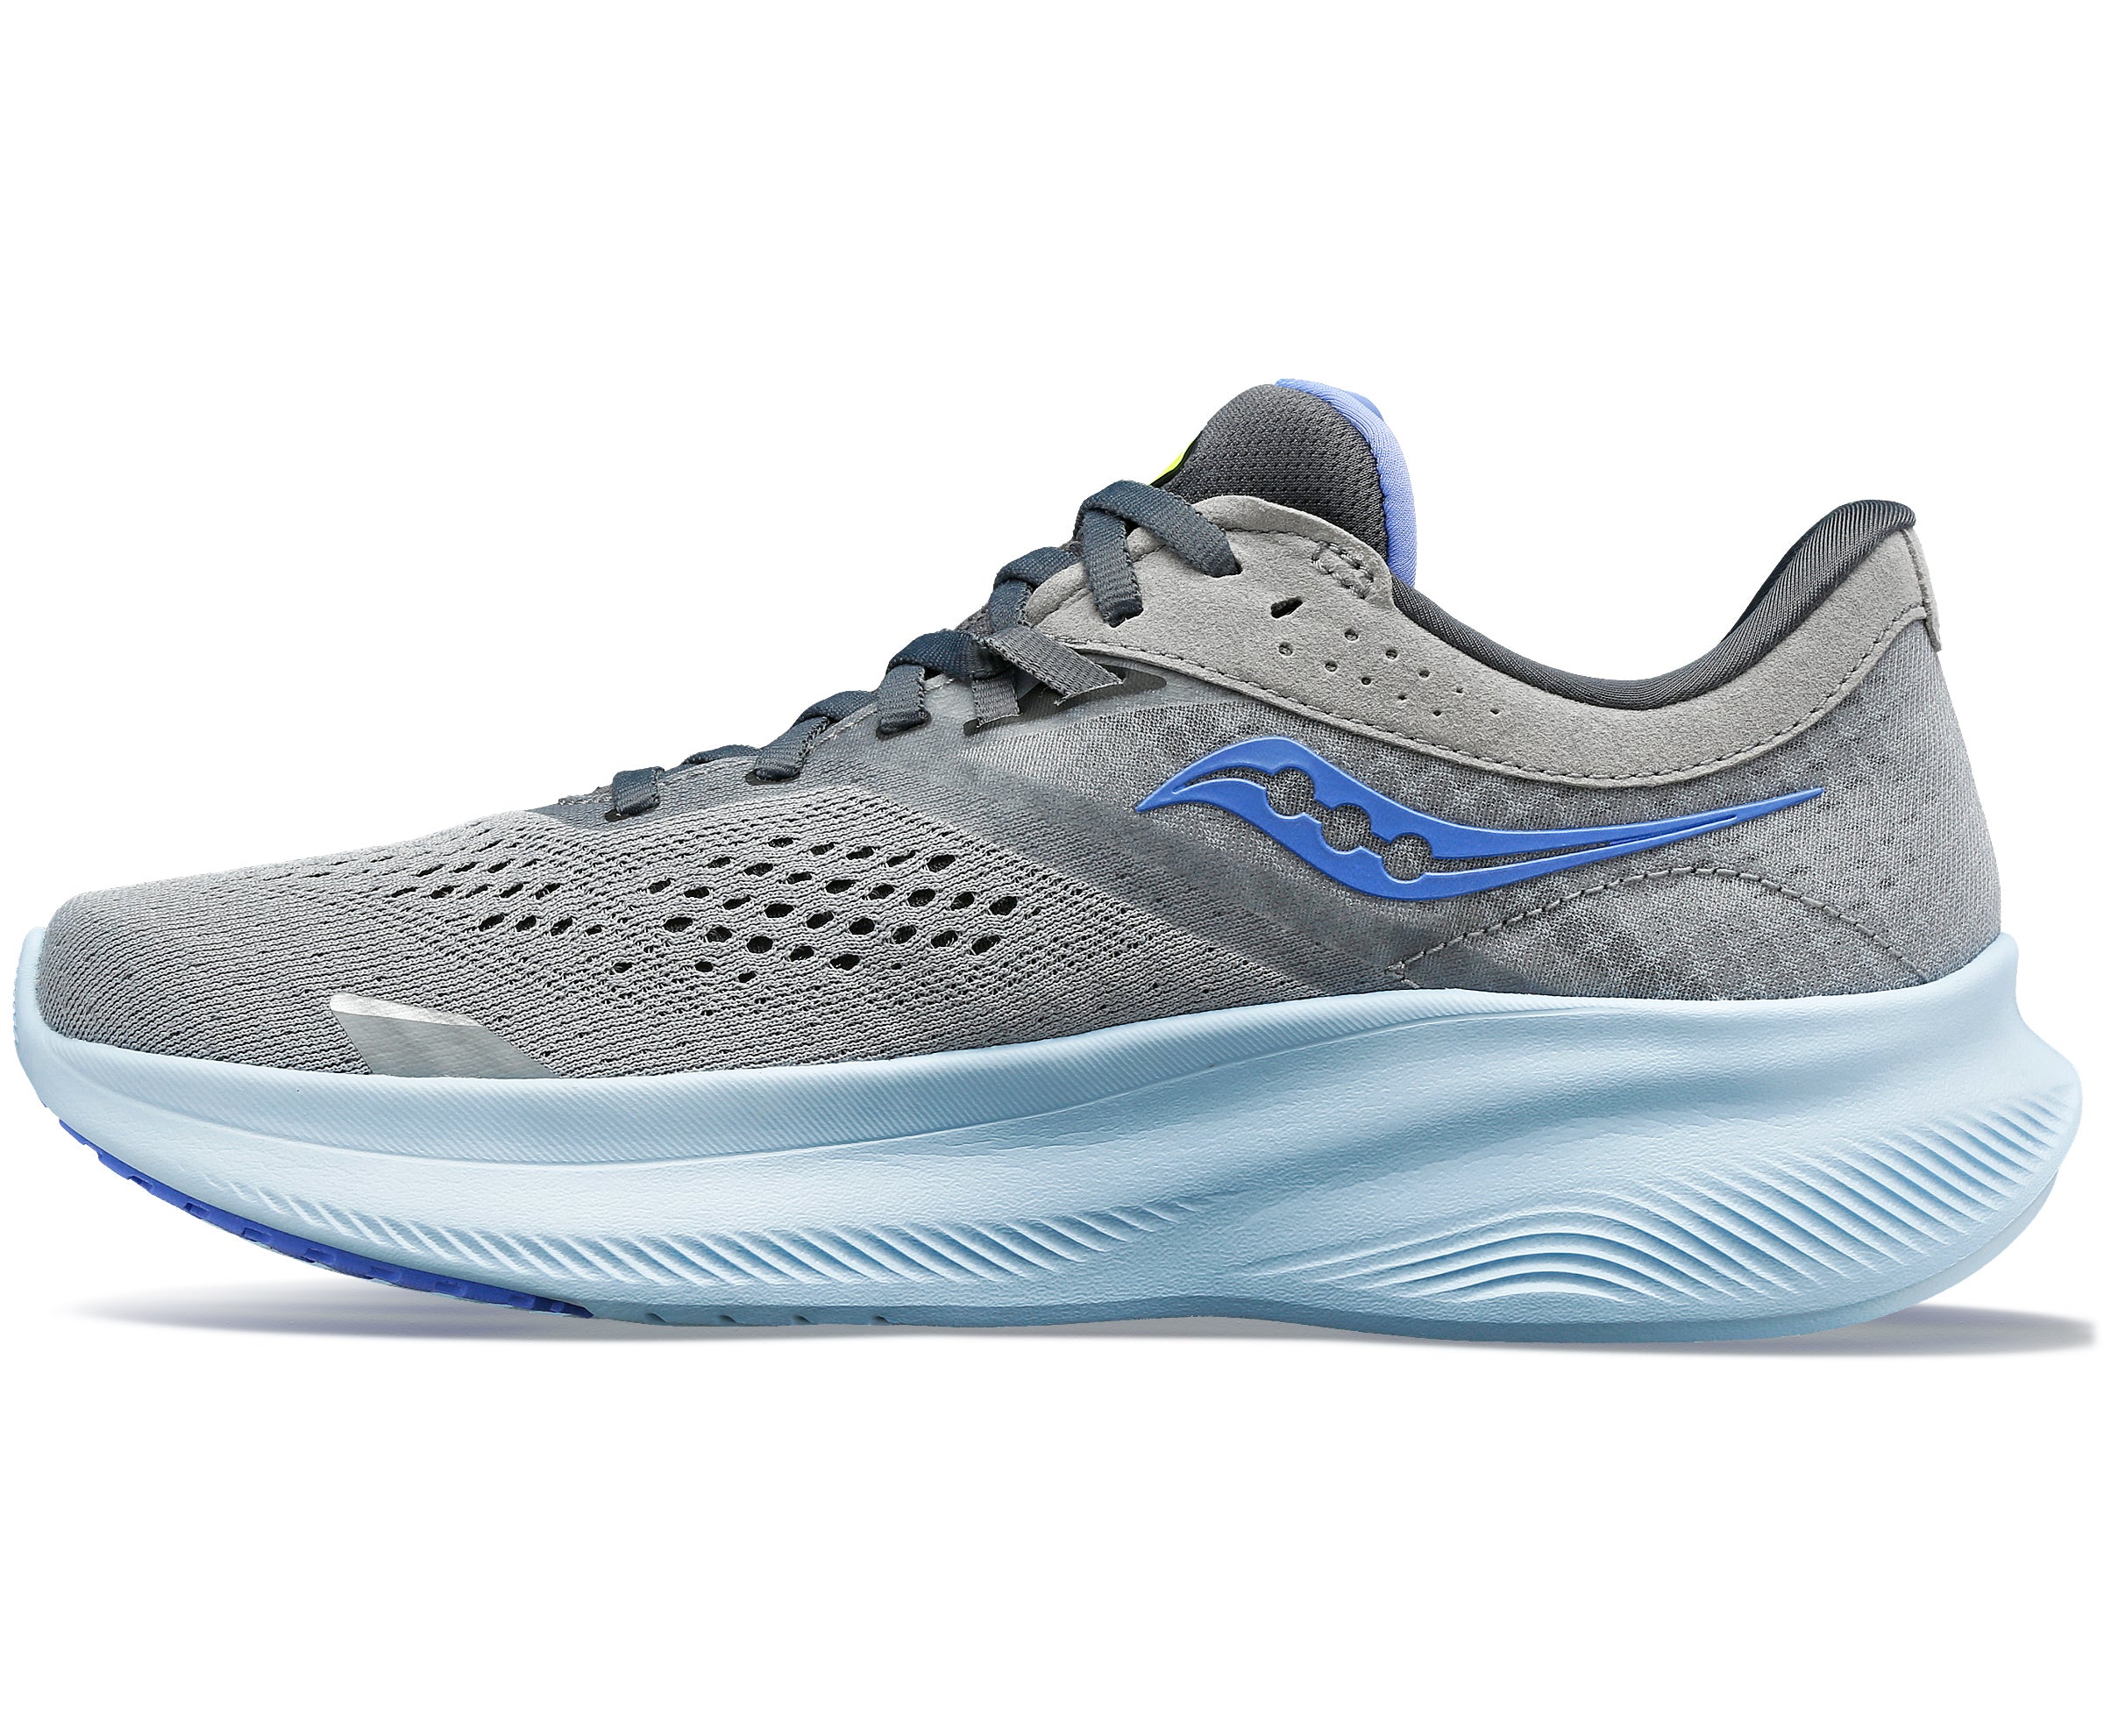 Saucony Ride 16, women, fossil/pool, grey/blue 